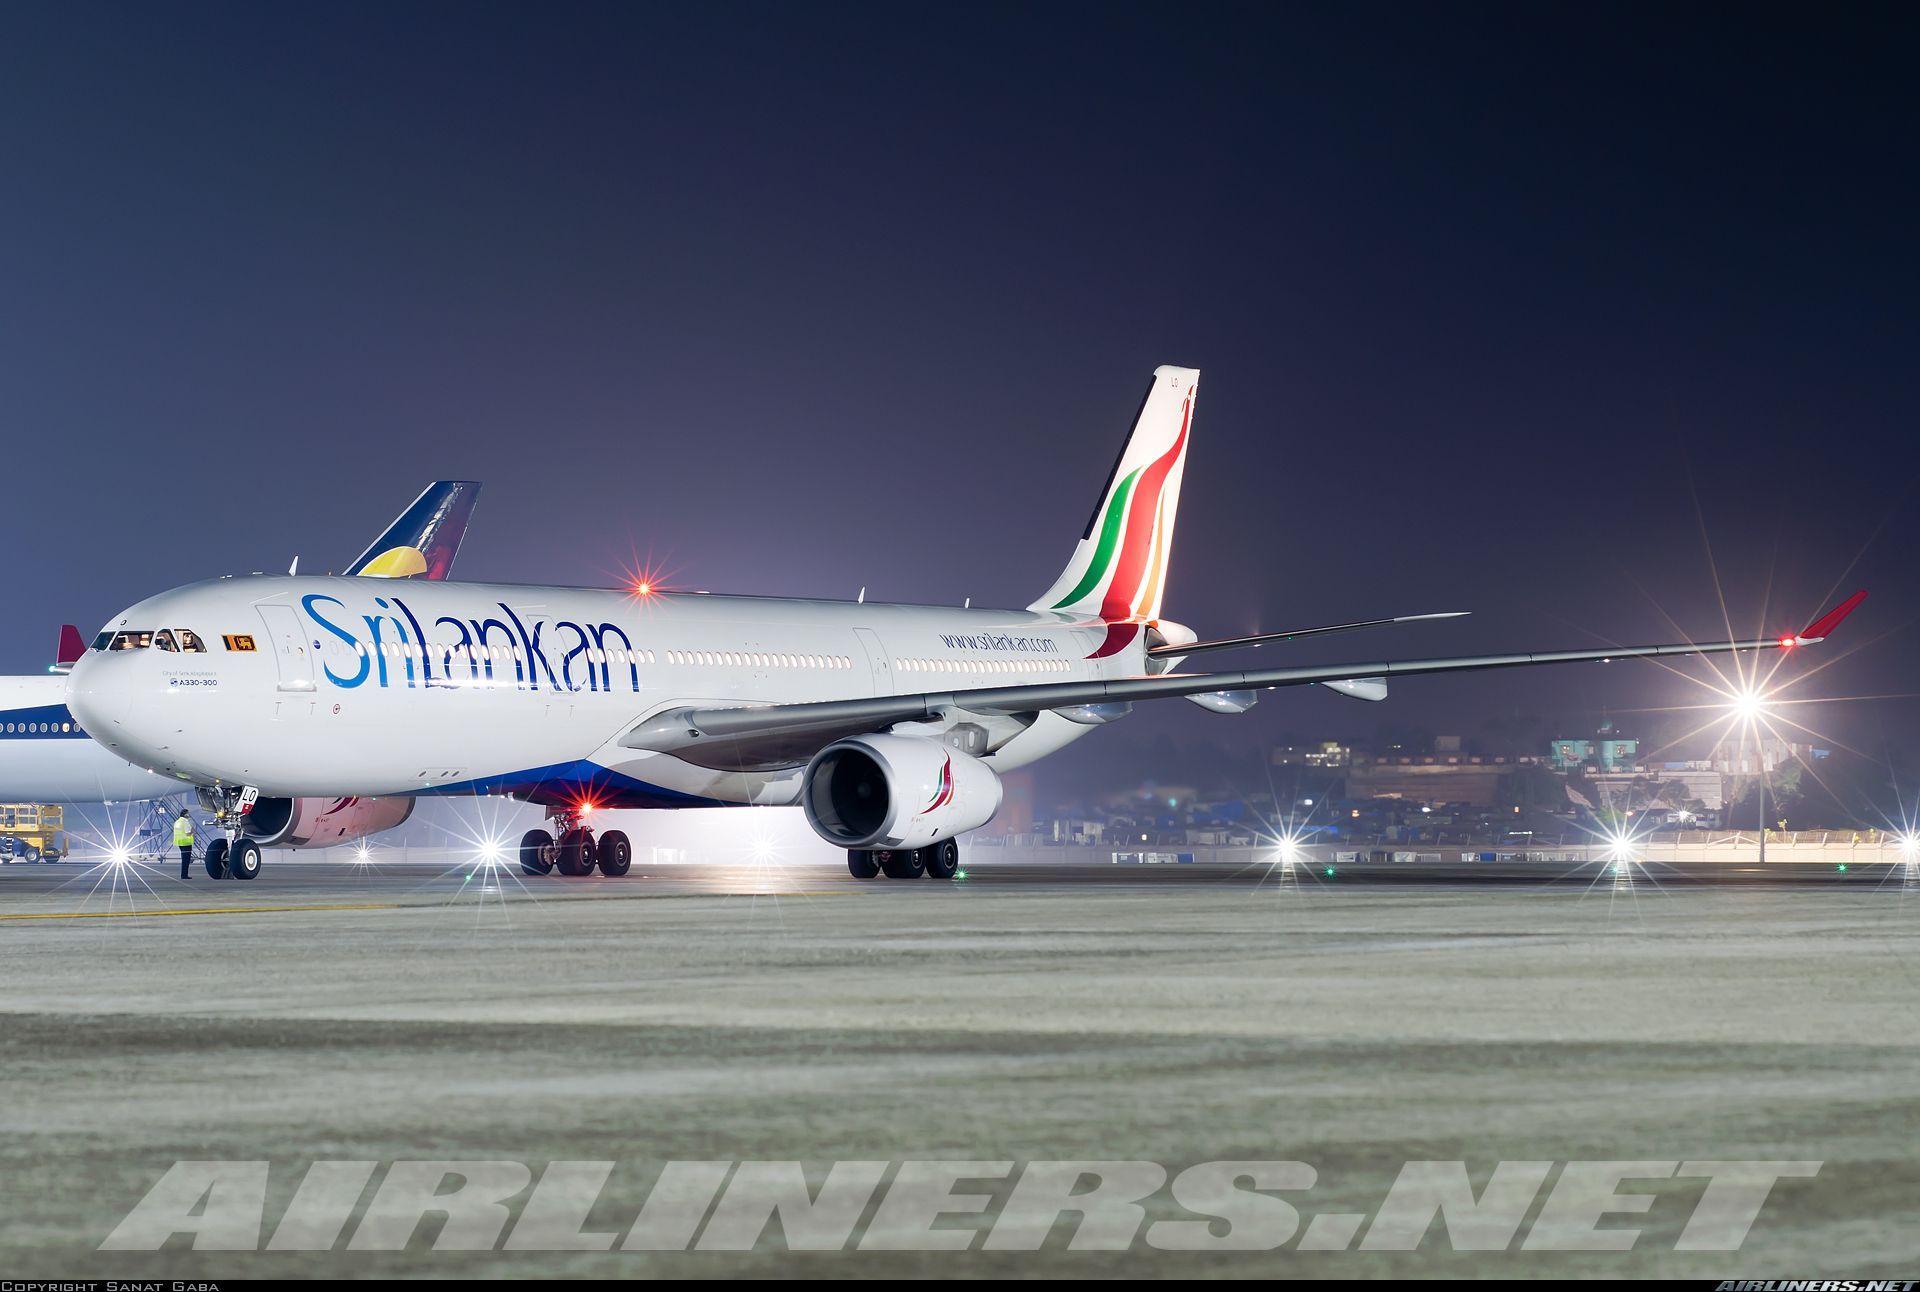 Airbus A330 343 Airlines. Aviation Photo. Airliners.net. Srilankan Airlines, Aviation, Airbus